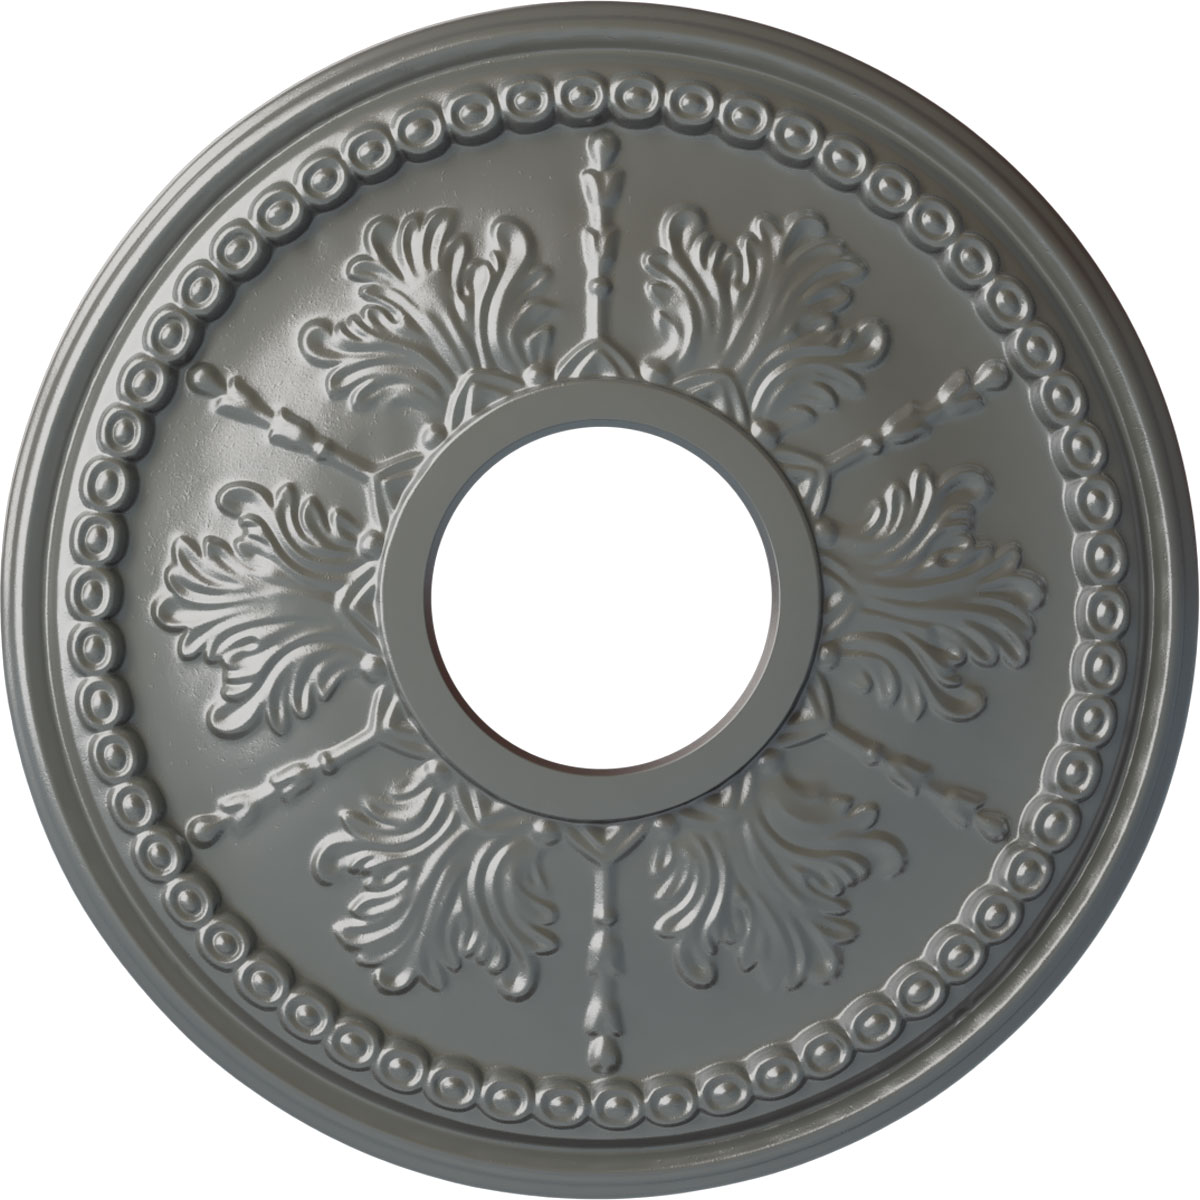 Ekena Millwork 13 7/8"OD x 3 3/4"ID x 1 1/4"P Tirana Ceiling Medallion (Fits Canopies up to 4 3/4"), Hand-Painted Silver - image 1 of 4